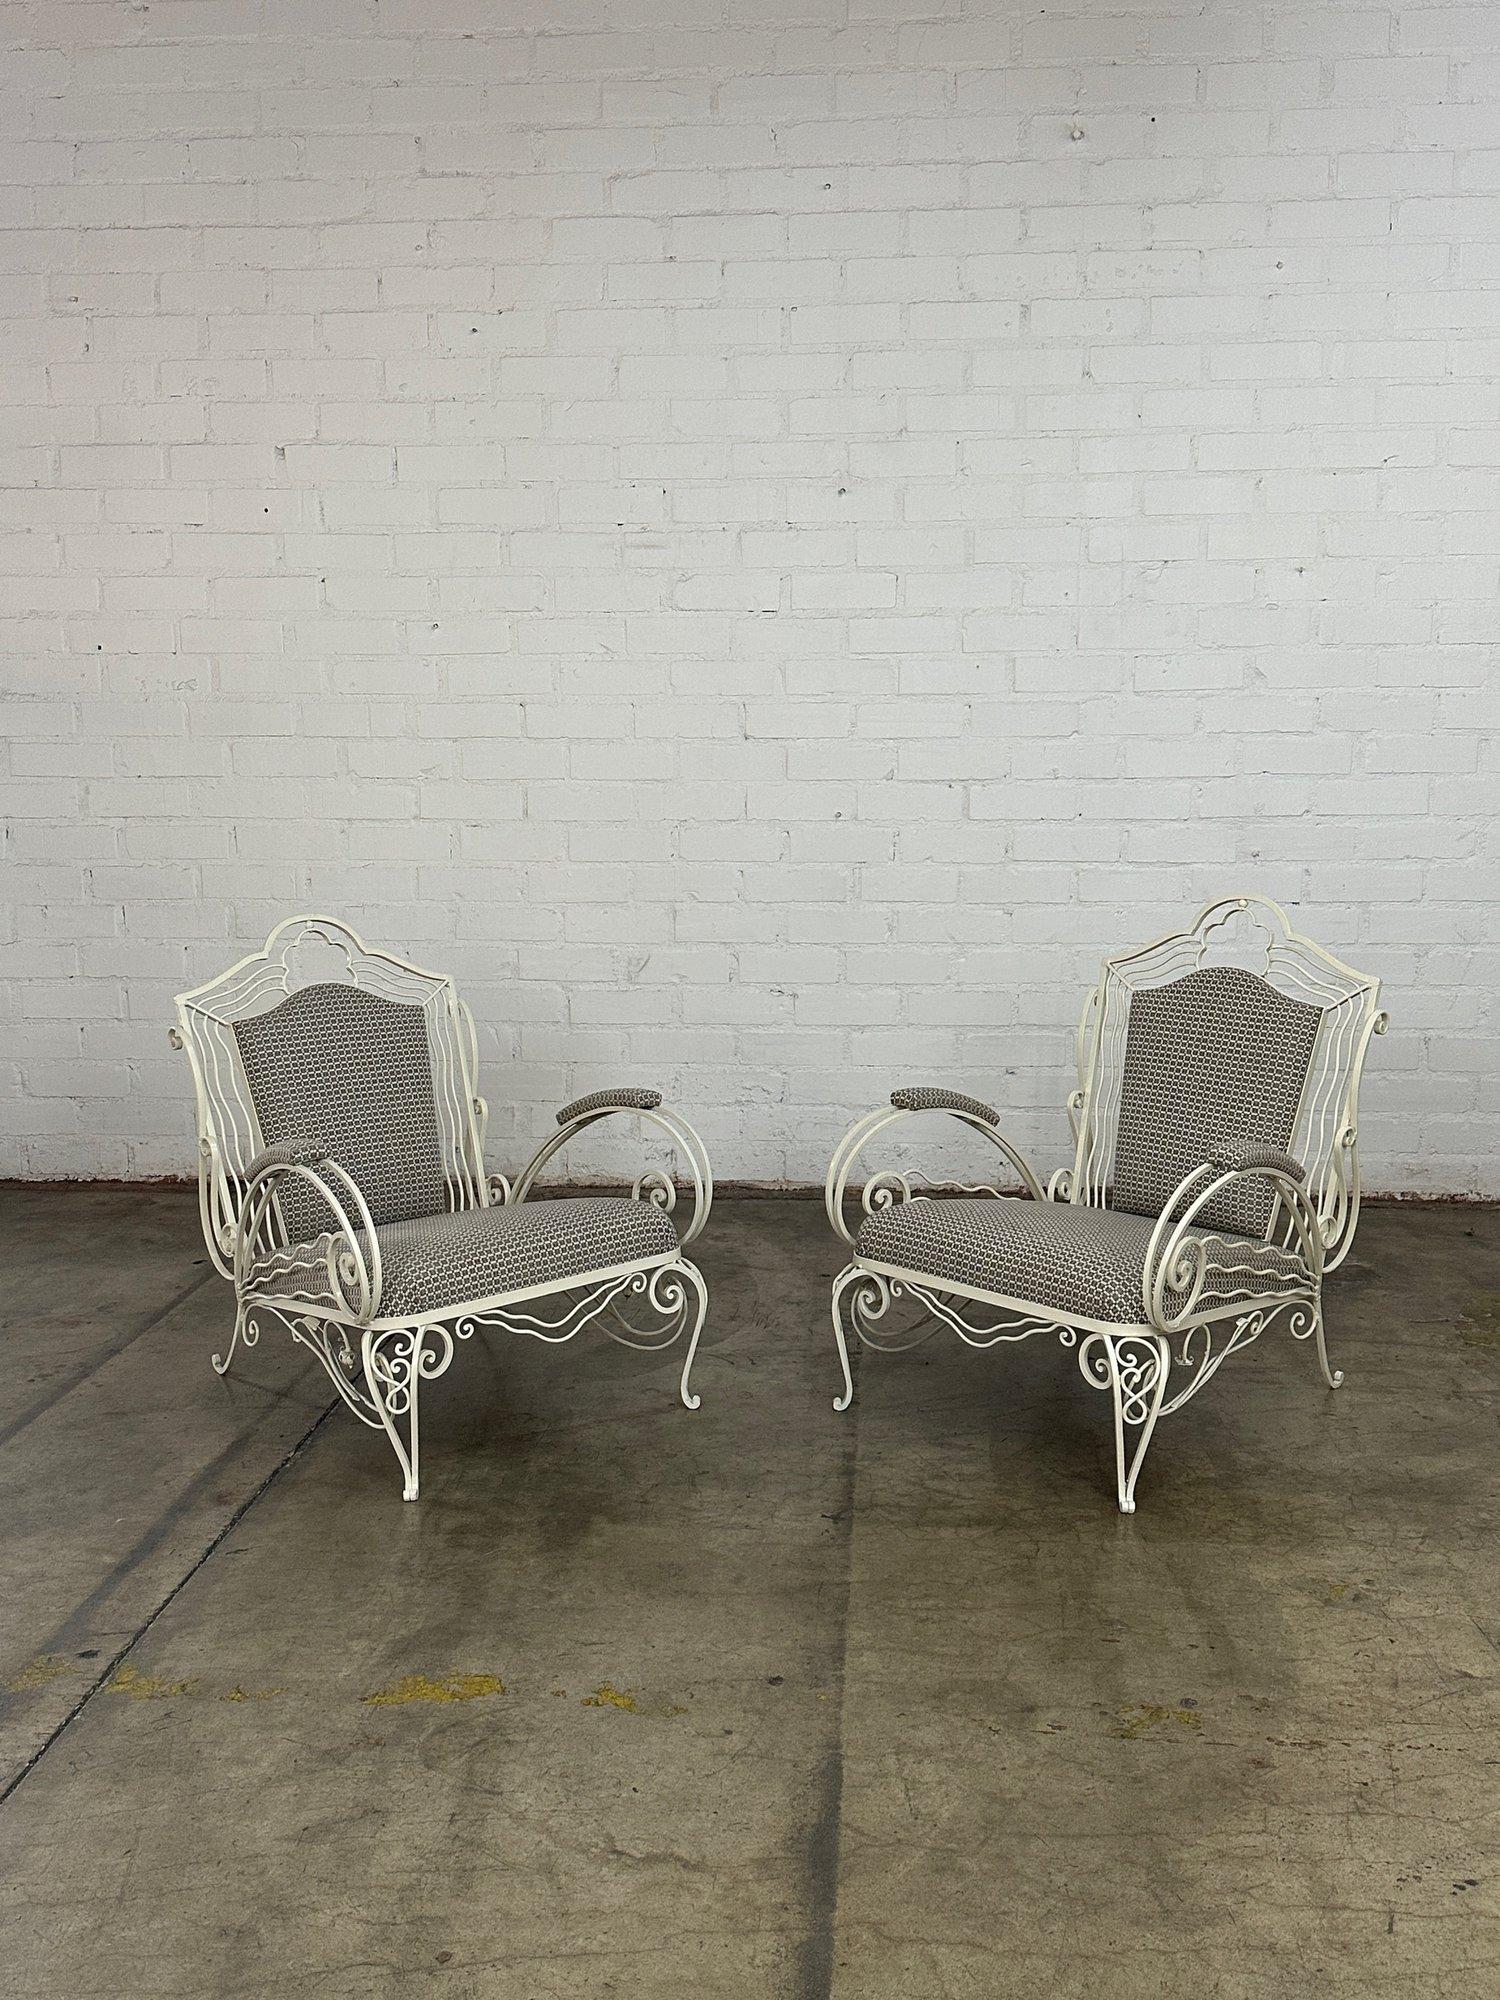 W27.5 D34 H33.5 SW22 SD22 SH14 AH21

Vintage French Iron Chairs fully restored by previous owners. The pair has been powder coated and reupholstered and both show in great condition. Chairs are structurally sound and sturdy. Price is for the pair.